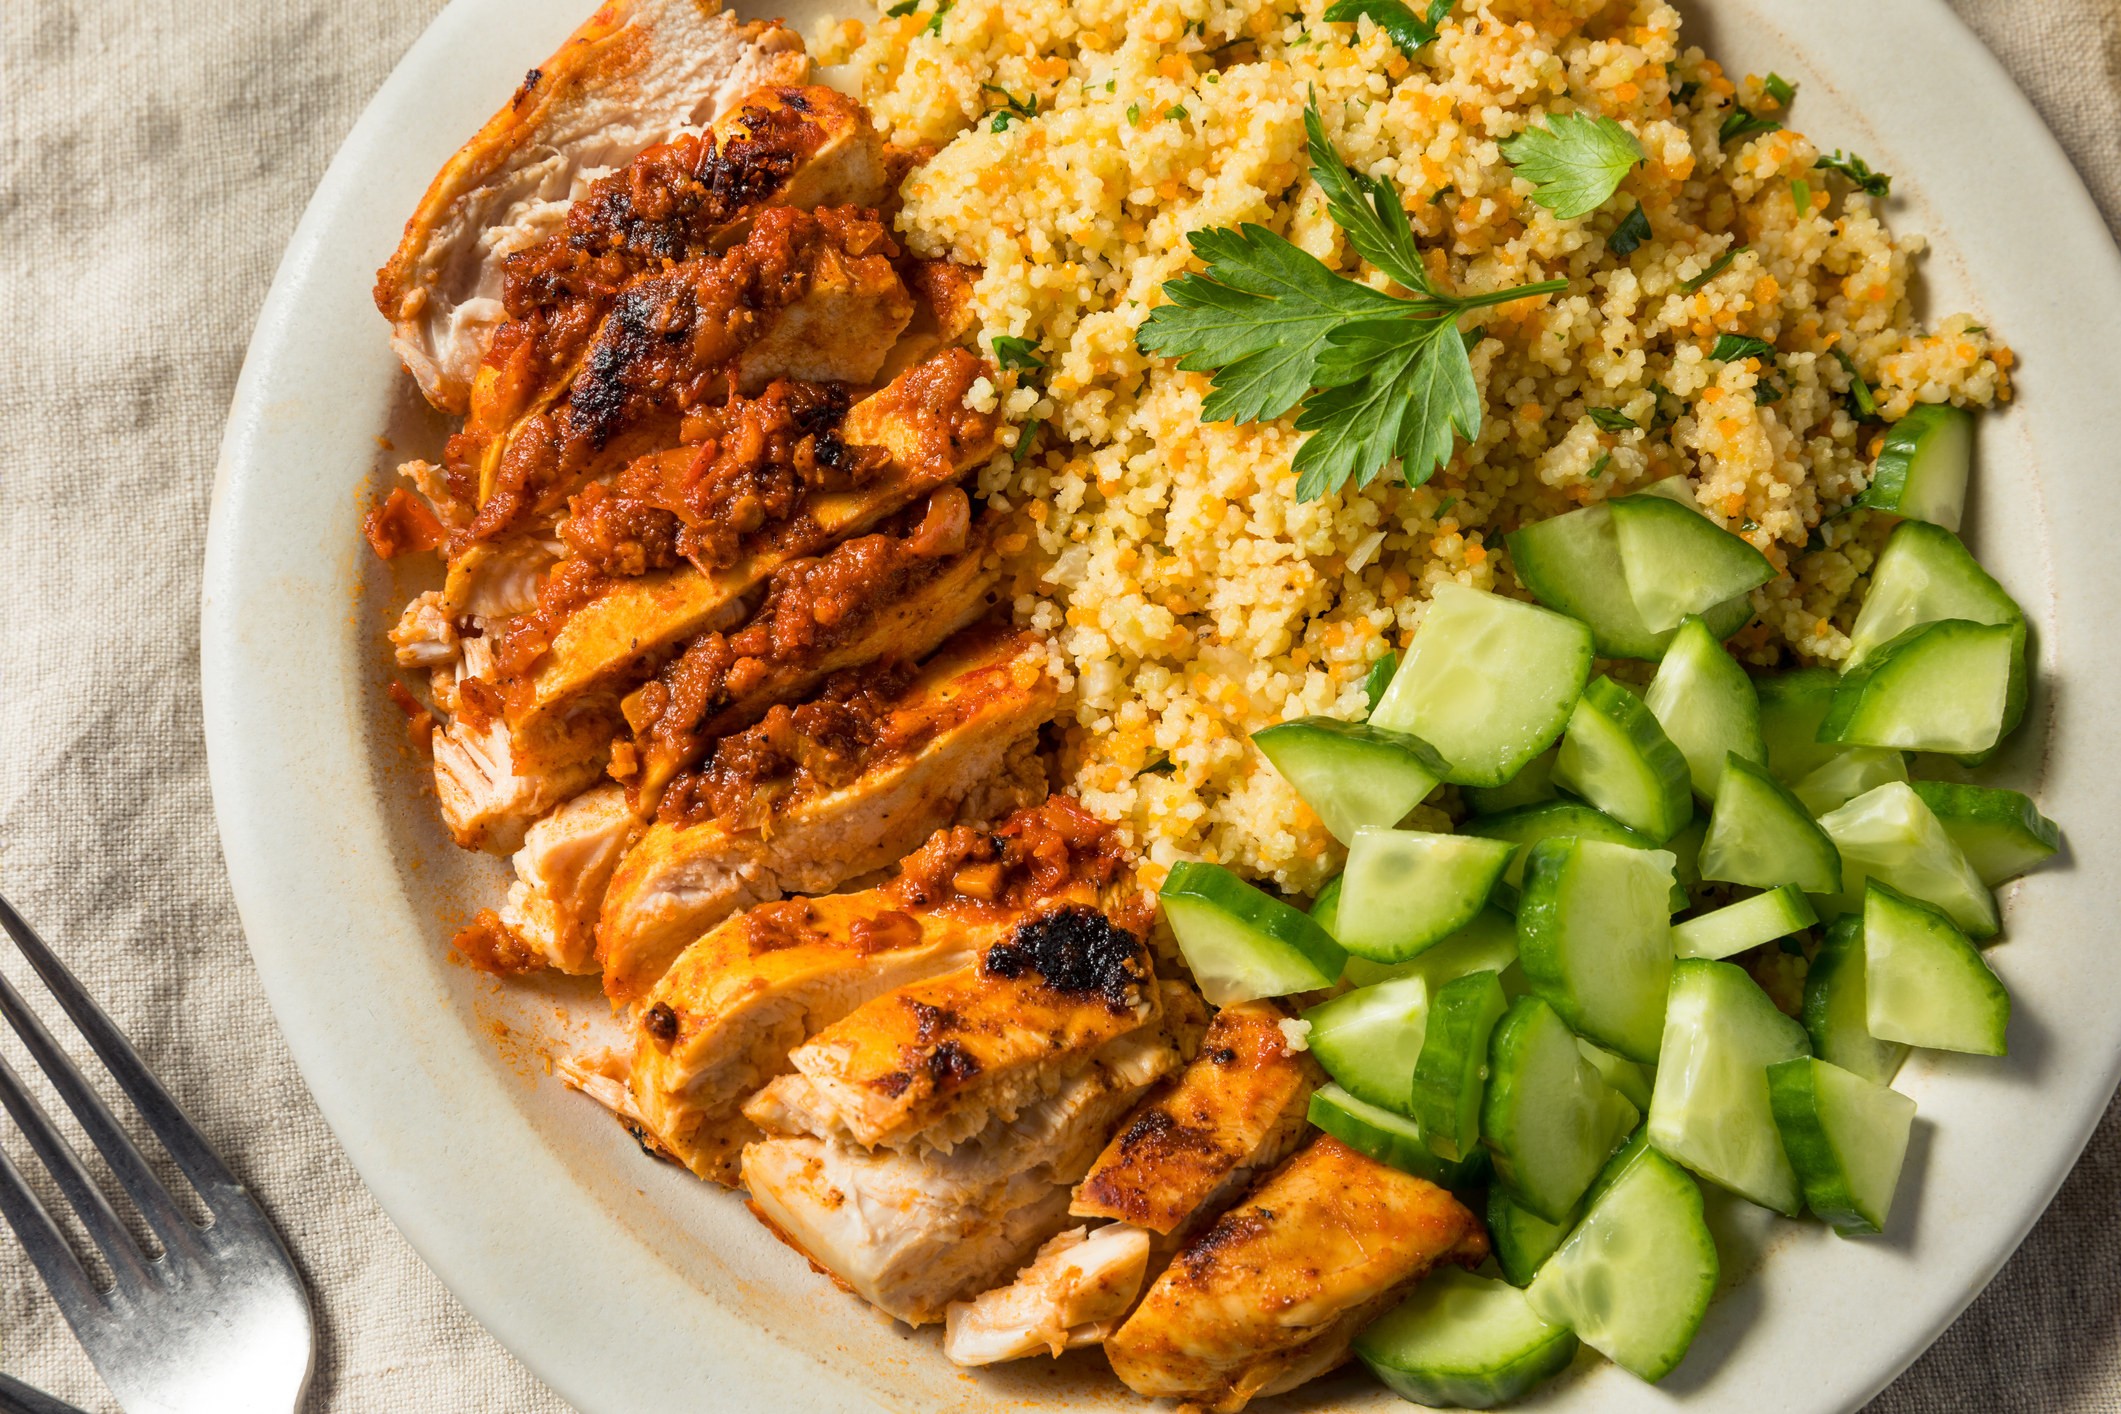 Harissa chicken with couscous and cucumber.